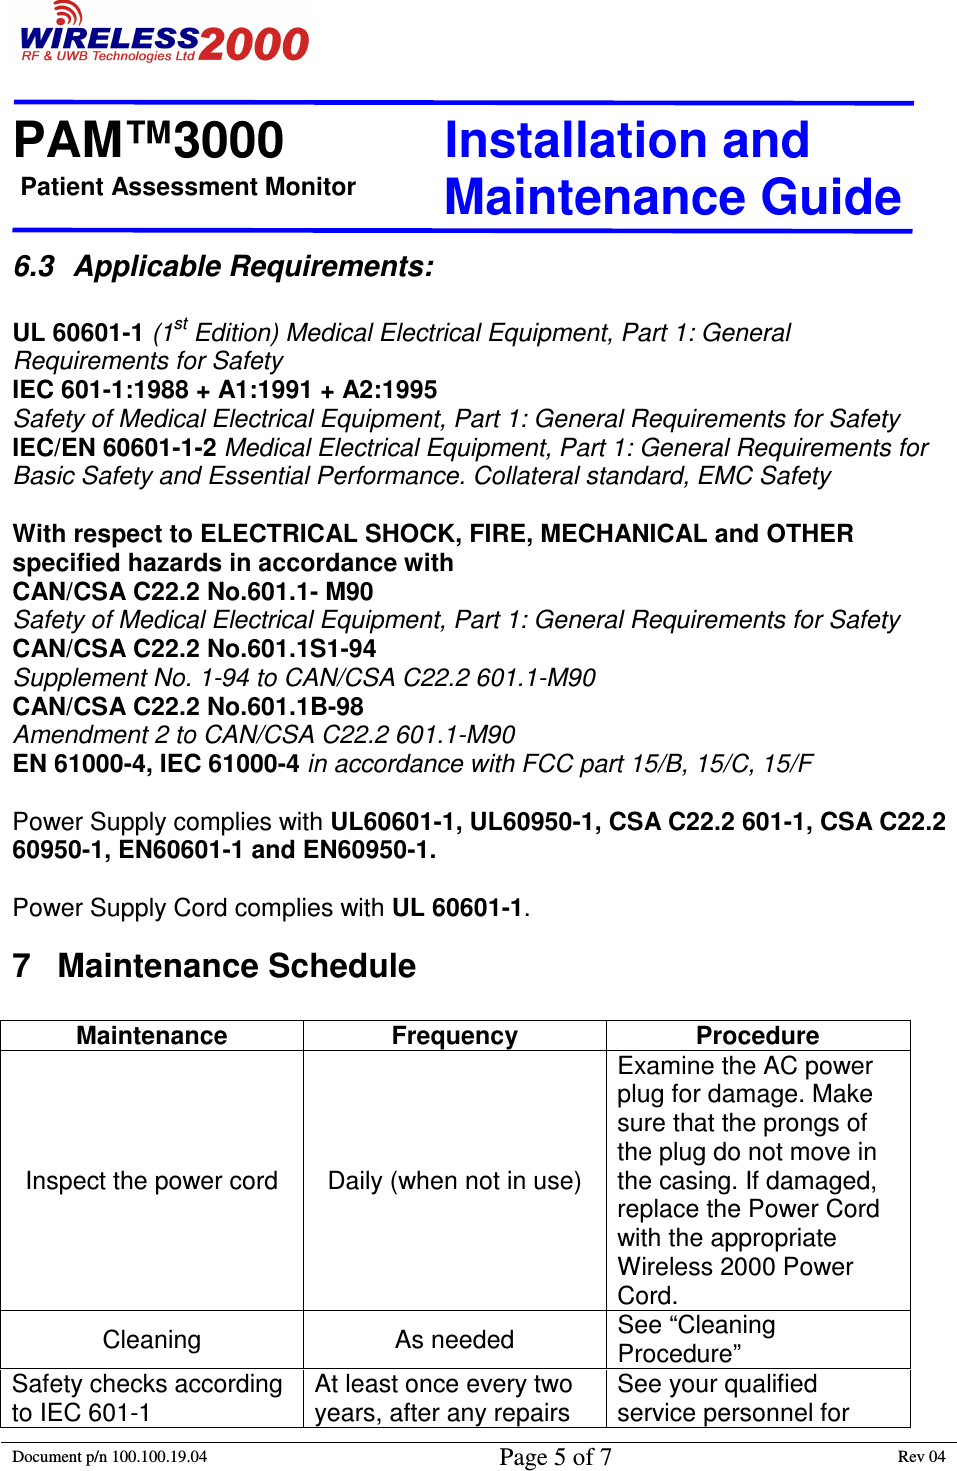 Patient Assessment Monitor                                                                  PAM™3000                       Installation and   Maintenance Guide  Document p/n 100.100.19.04 Page 5 of 7 Rev 04                                                                                                                                         6.3  Applicable Requirements:   UL 60601-1 (1st Edition) Medical Electrical Equipment, Part 1: General Requirements for Safety IEC 601-1:1988 + A1:1991 + A2:1995  Safety of Medical Electrical Equipment, Part 1: General Requirements for Safety  IEC/EN 60601-1-2 Medical Electrical Equipment, Part 1: General Requirements for Basic Safety and Essential Performance. Collateral standard, EMC Safety  With respect to ELECTRICAL SHOCK, FIRE, MECHANICAL and OTHER specified hazards in accordance with  CAN/CSA C22.2 No.601.1- M90   Safety of Medical Electrical Equipment, Part 1: General Requirements for Safety CAN/CSA C22.2 No.601.1S1-94  Supplement No. 1-94 to CAN/CSA C22.2 601.1-M90 CAN/CSA C22.2 No.601.1B-98  Amendment 2 to CAN/CSA C22.2 601.1-M90 EN 61000-4, IEC 61000-4 in accordance with FCC part 15/B, 15/C, 15/F  Power Supply complies with UL60601-1, UL60950-1, CSA C22.2 601-1, CSA C22.2 60950-1, EN60601-1 and EN60950-1.  Power Supply Cord complies with UL 60601-1. 7  Maintenance Schedule   Maintenance  Frequency  Procedure Inspect the power cord  Daily (when not in use) Examine the AC power plug for damage. Make sure that the prongs of the plug do not move in the casing. If damaged, replace the Power Cord with the appropriate Wireless 2000 Power Cord. Cleaning  As needed  See “Cleaning Procedure” Safety checks according to IEC 601-1 At least once every two years, after any repairs See your qualified service personnel for 